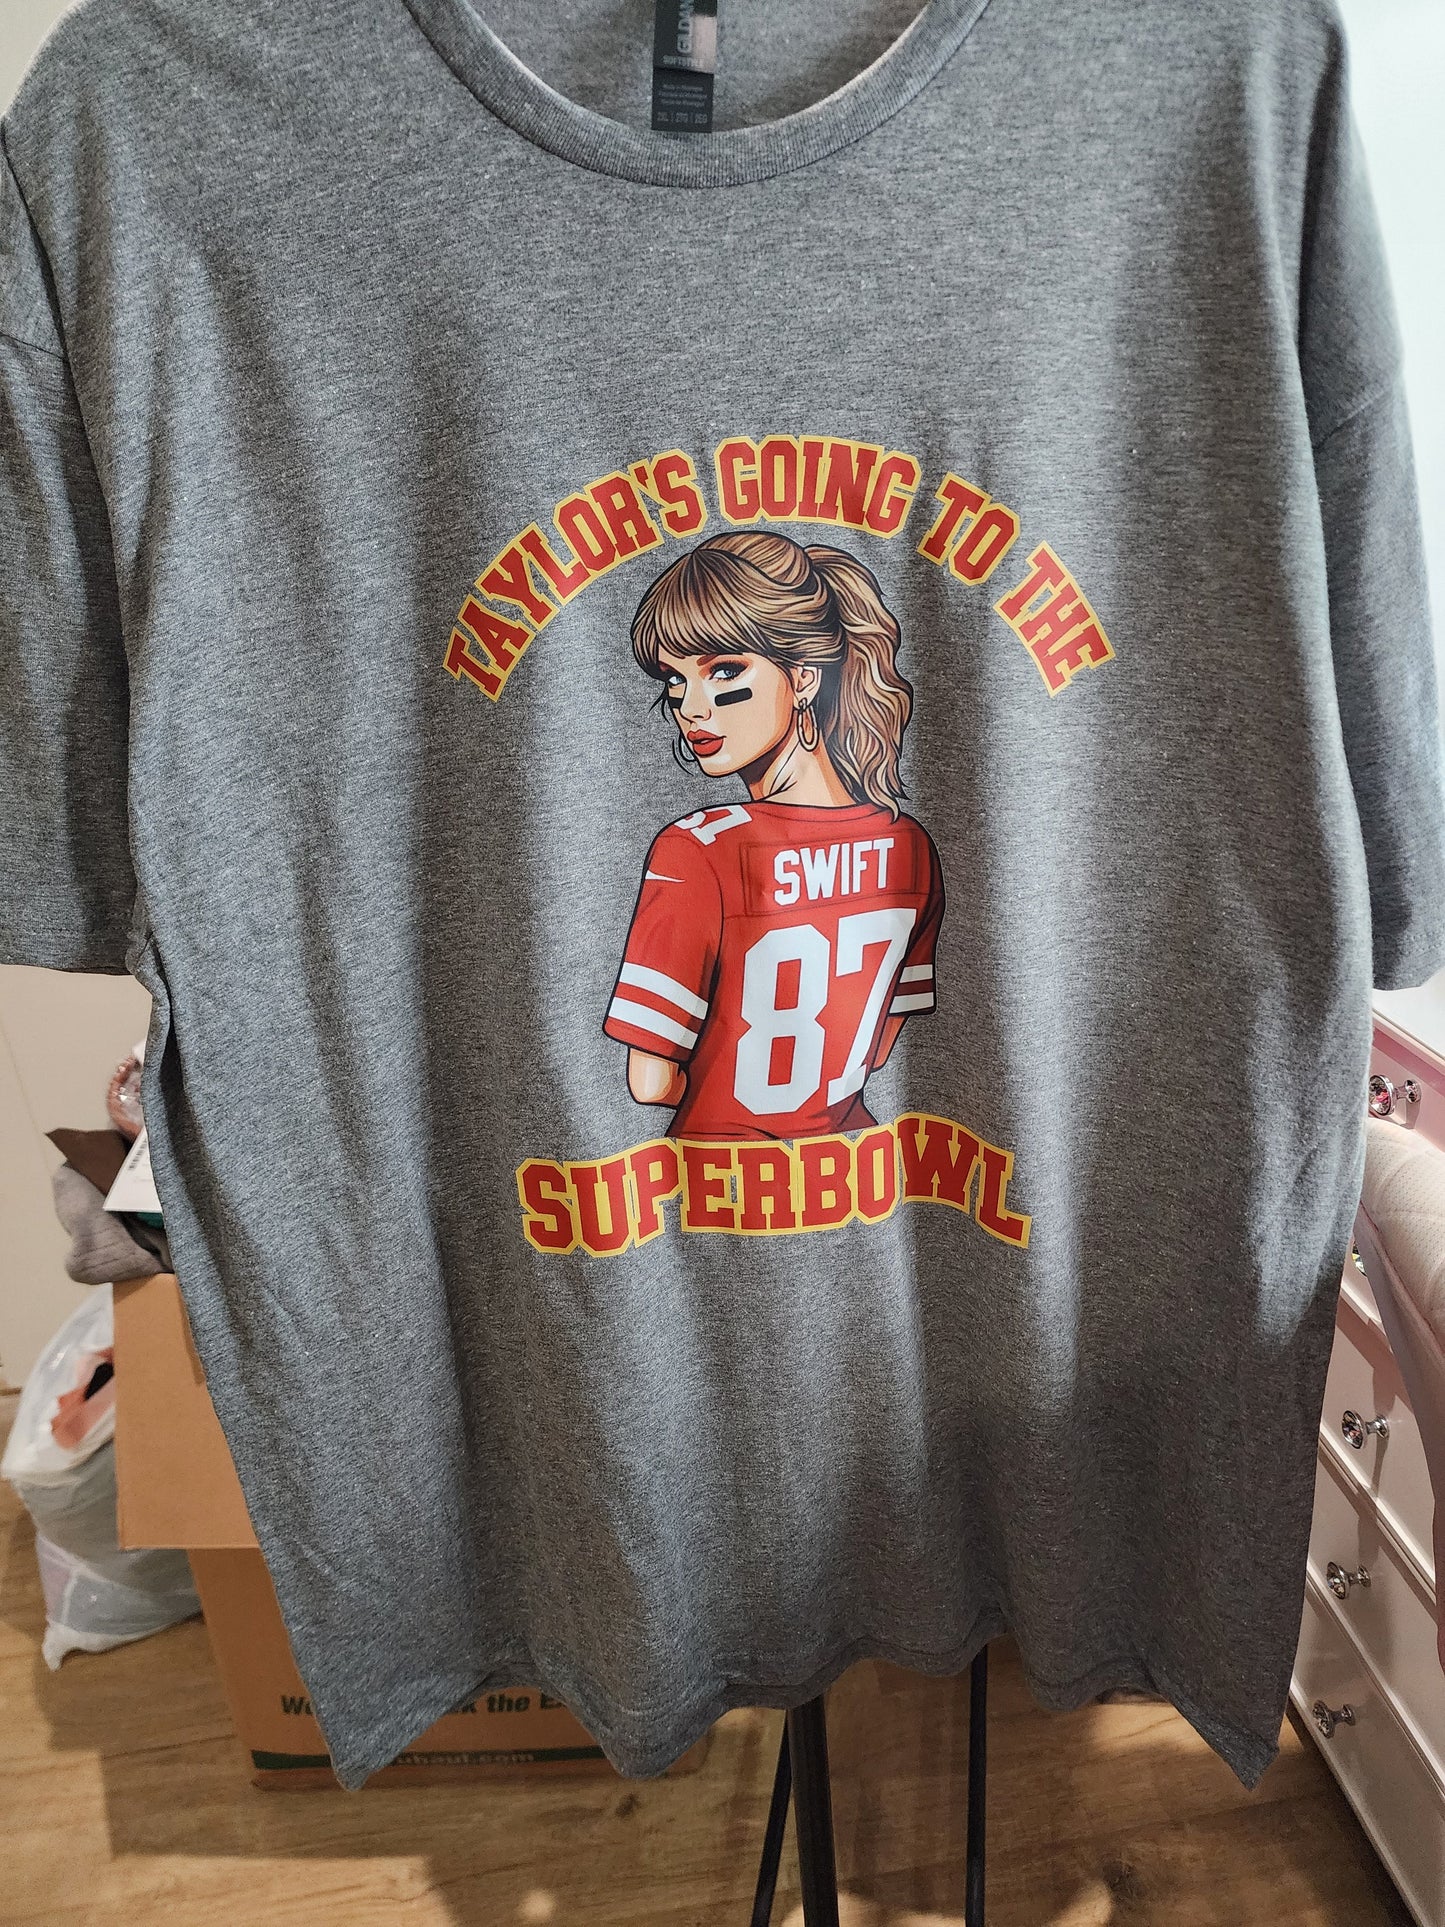 Taylor's Going to the Superbowl T-Shirts l